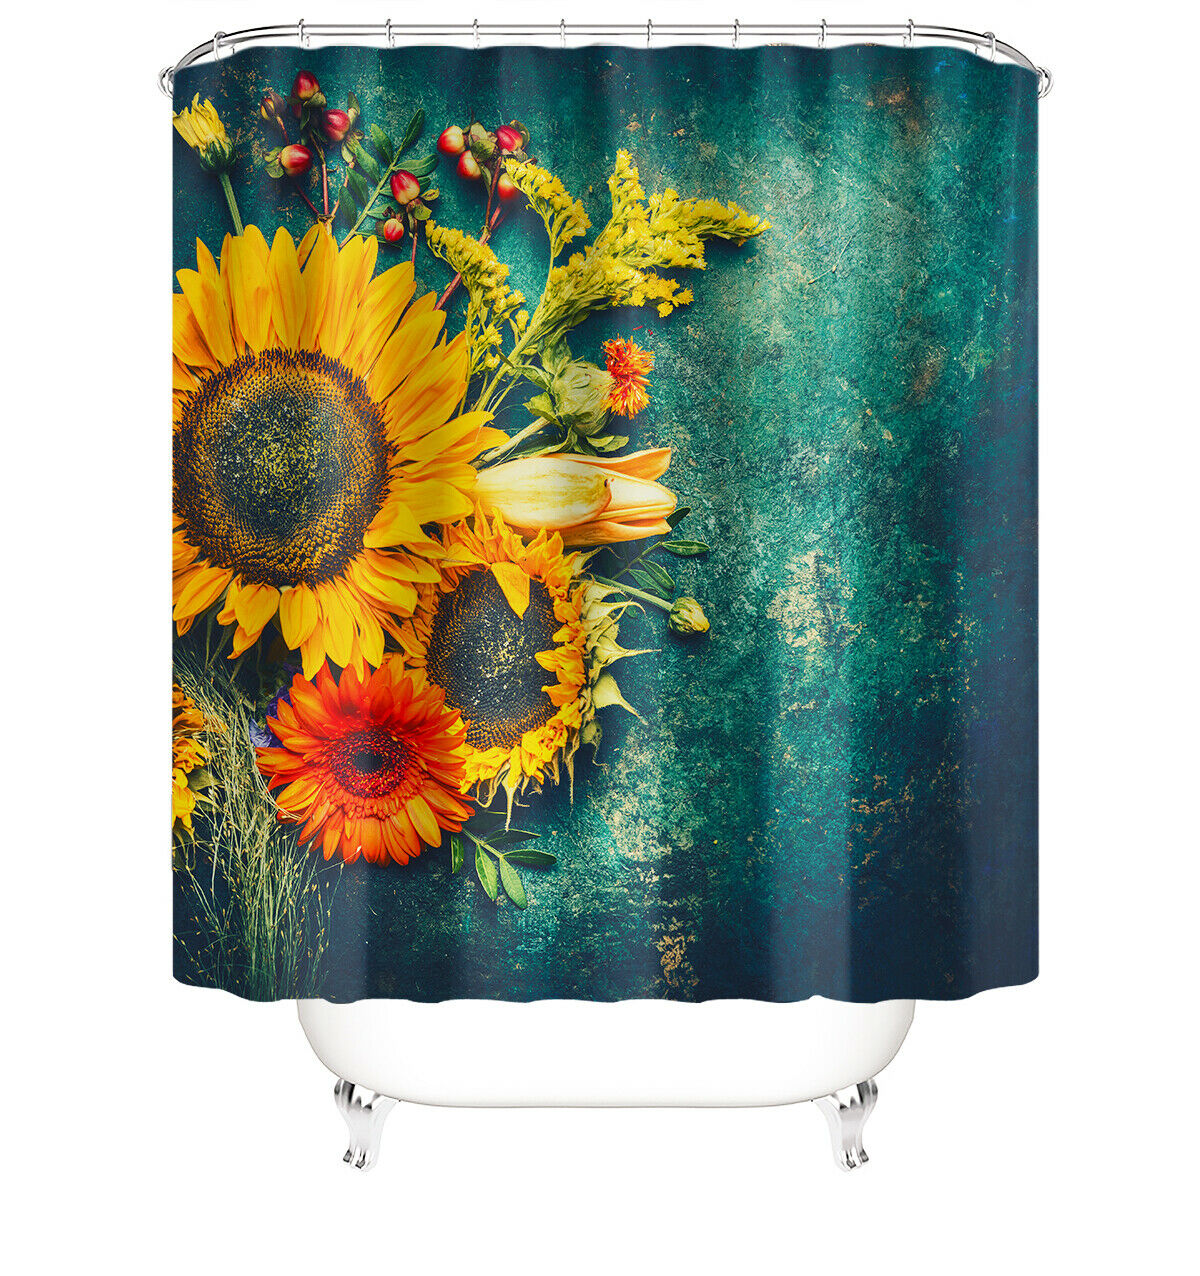 Sunflowers Shower Curtain Bathroom Rug Set Bath Mat Non-Slip Toilet Lid Cover-180×180cm Shower Curtain Only-Free Shipping at meselling99